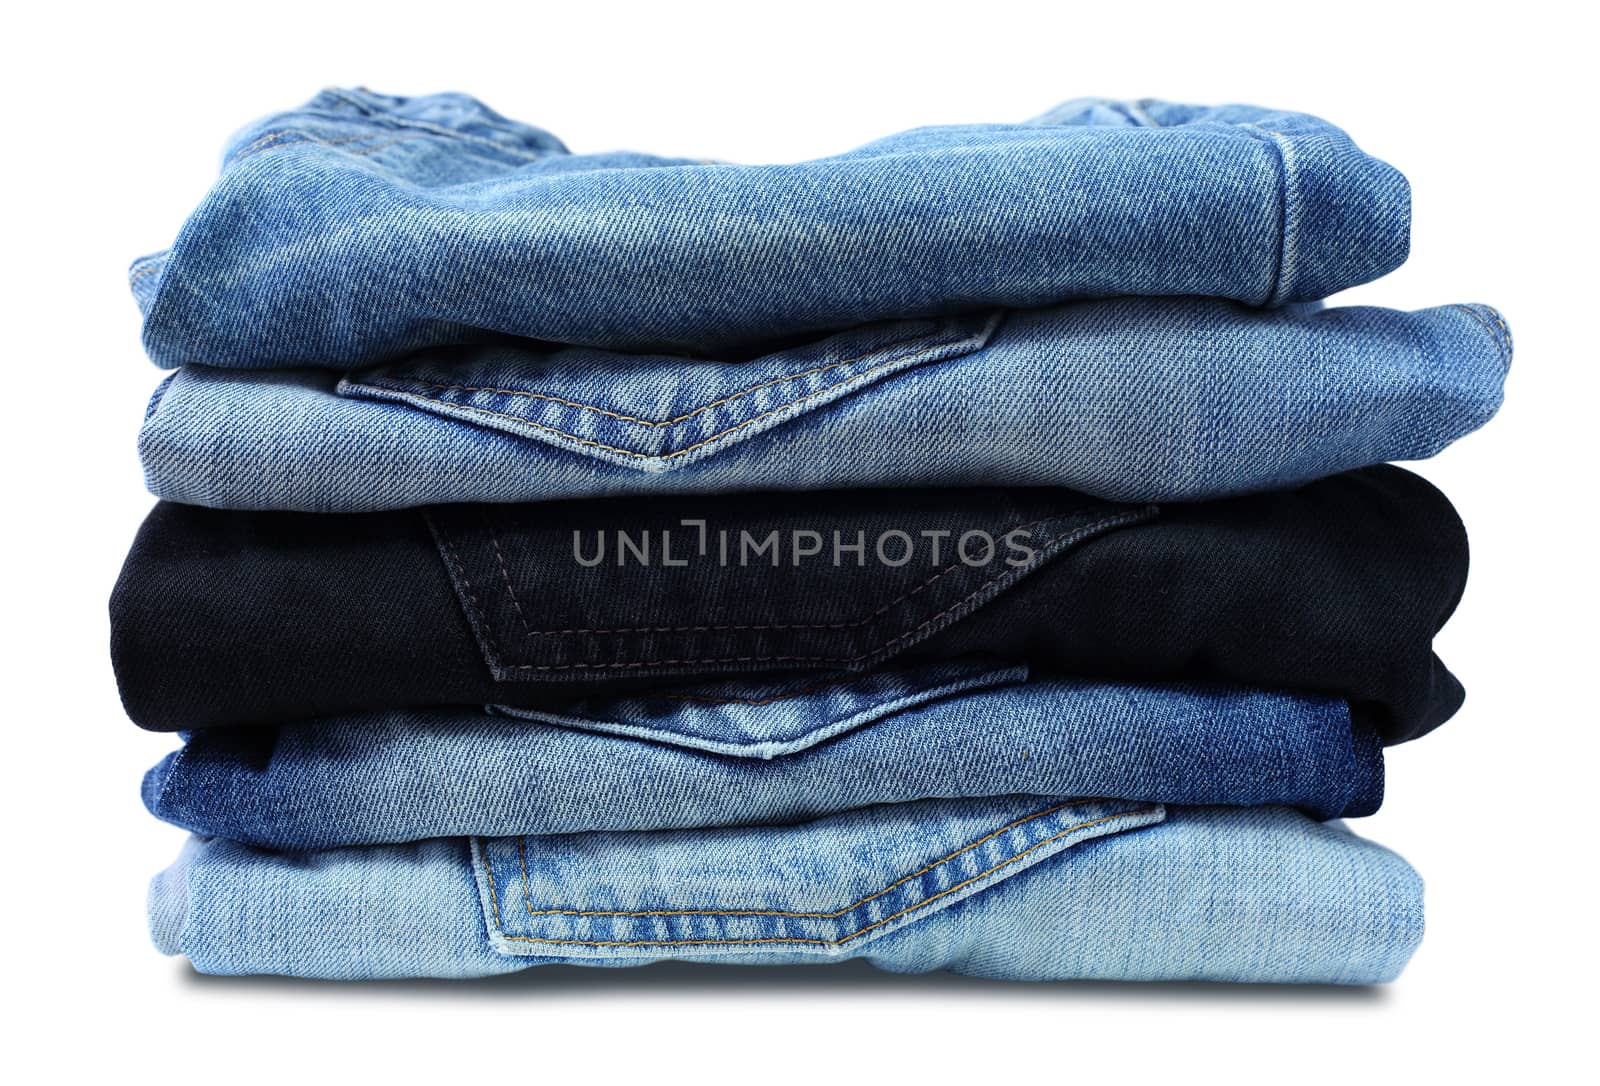 Stack of jeans by foto76